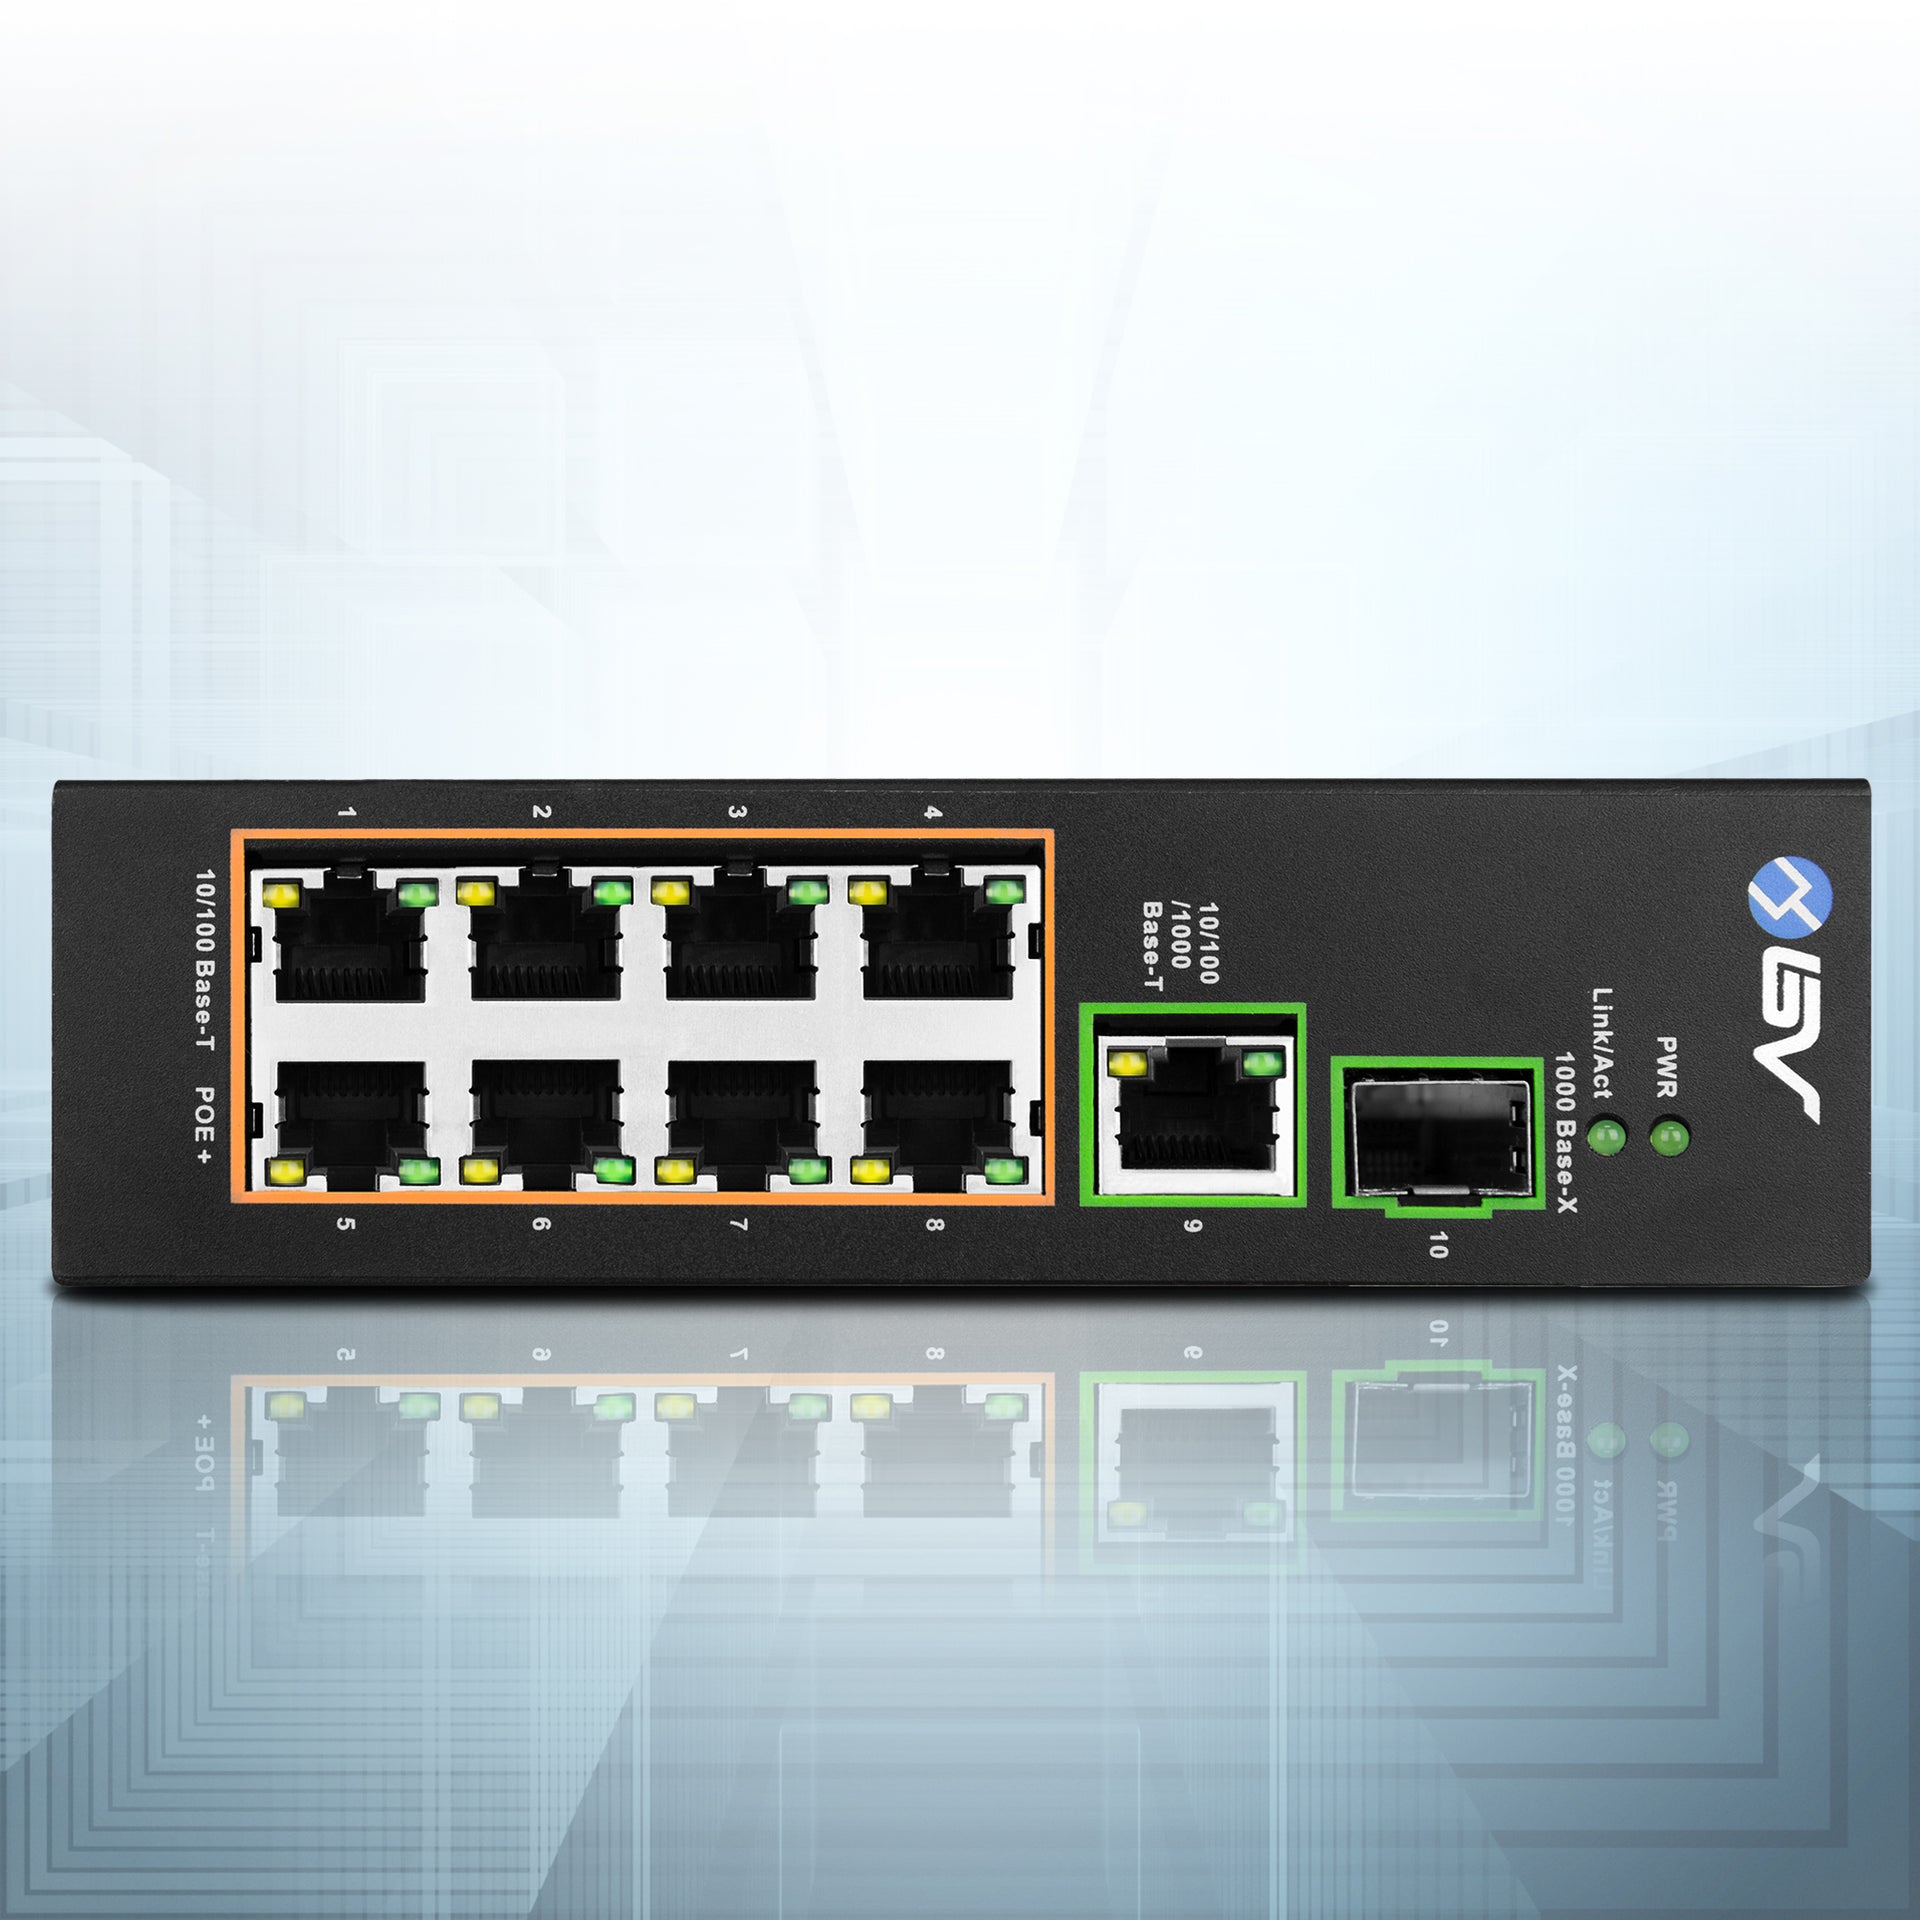 How to Choose A Suitable Power Over Ethernet Switch?